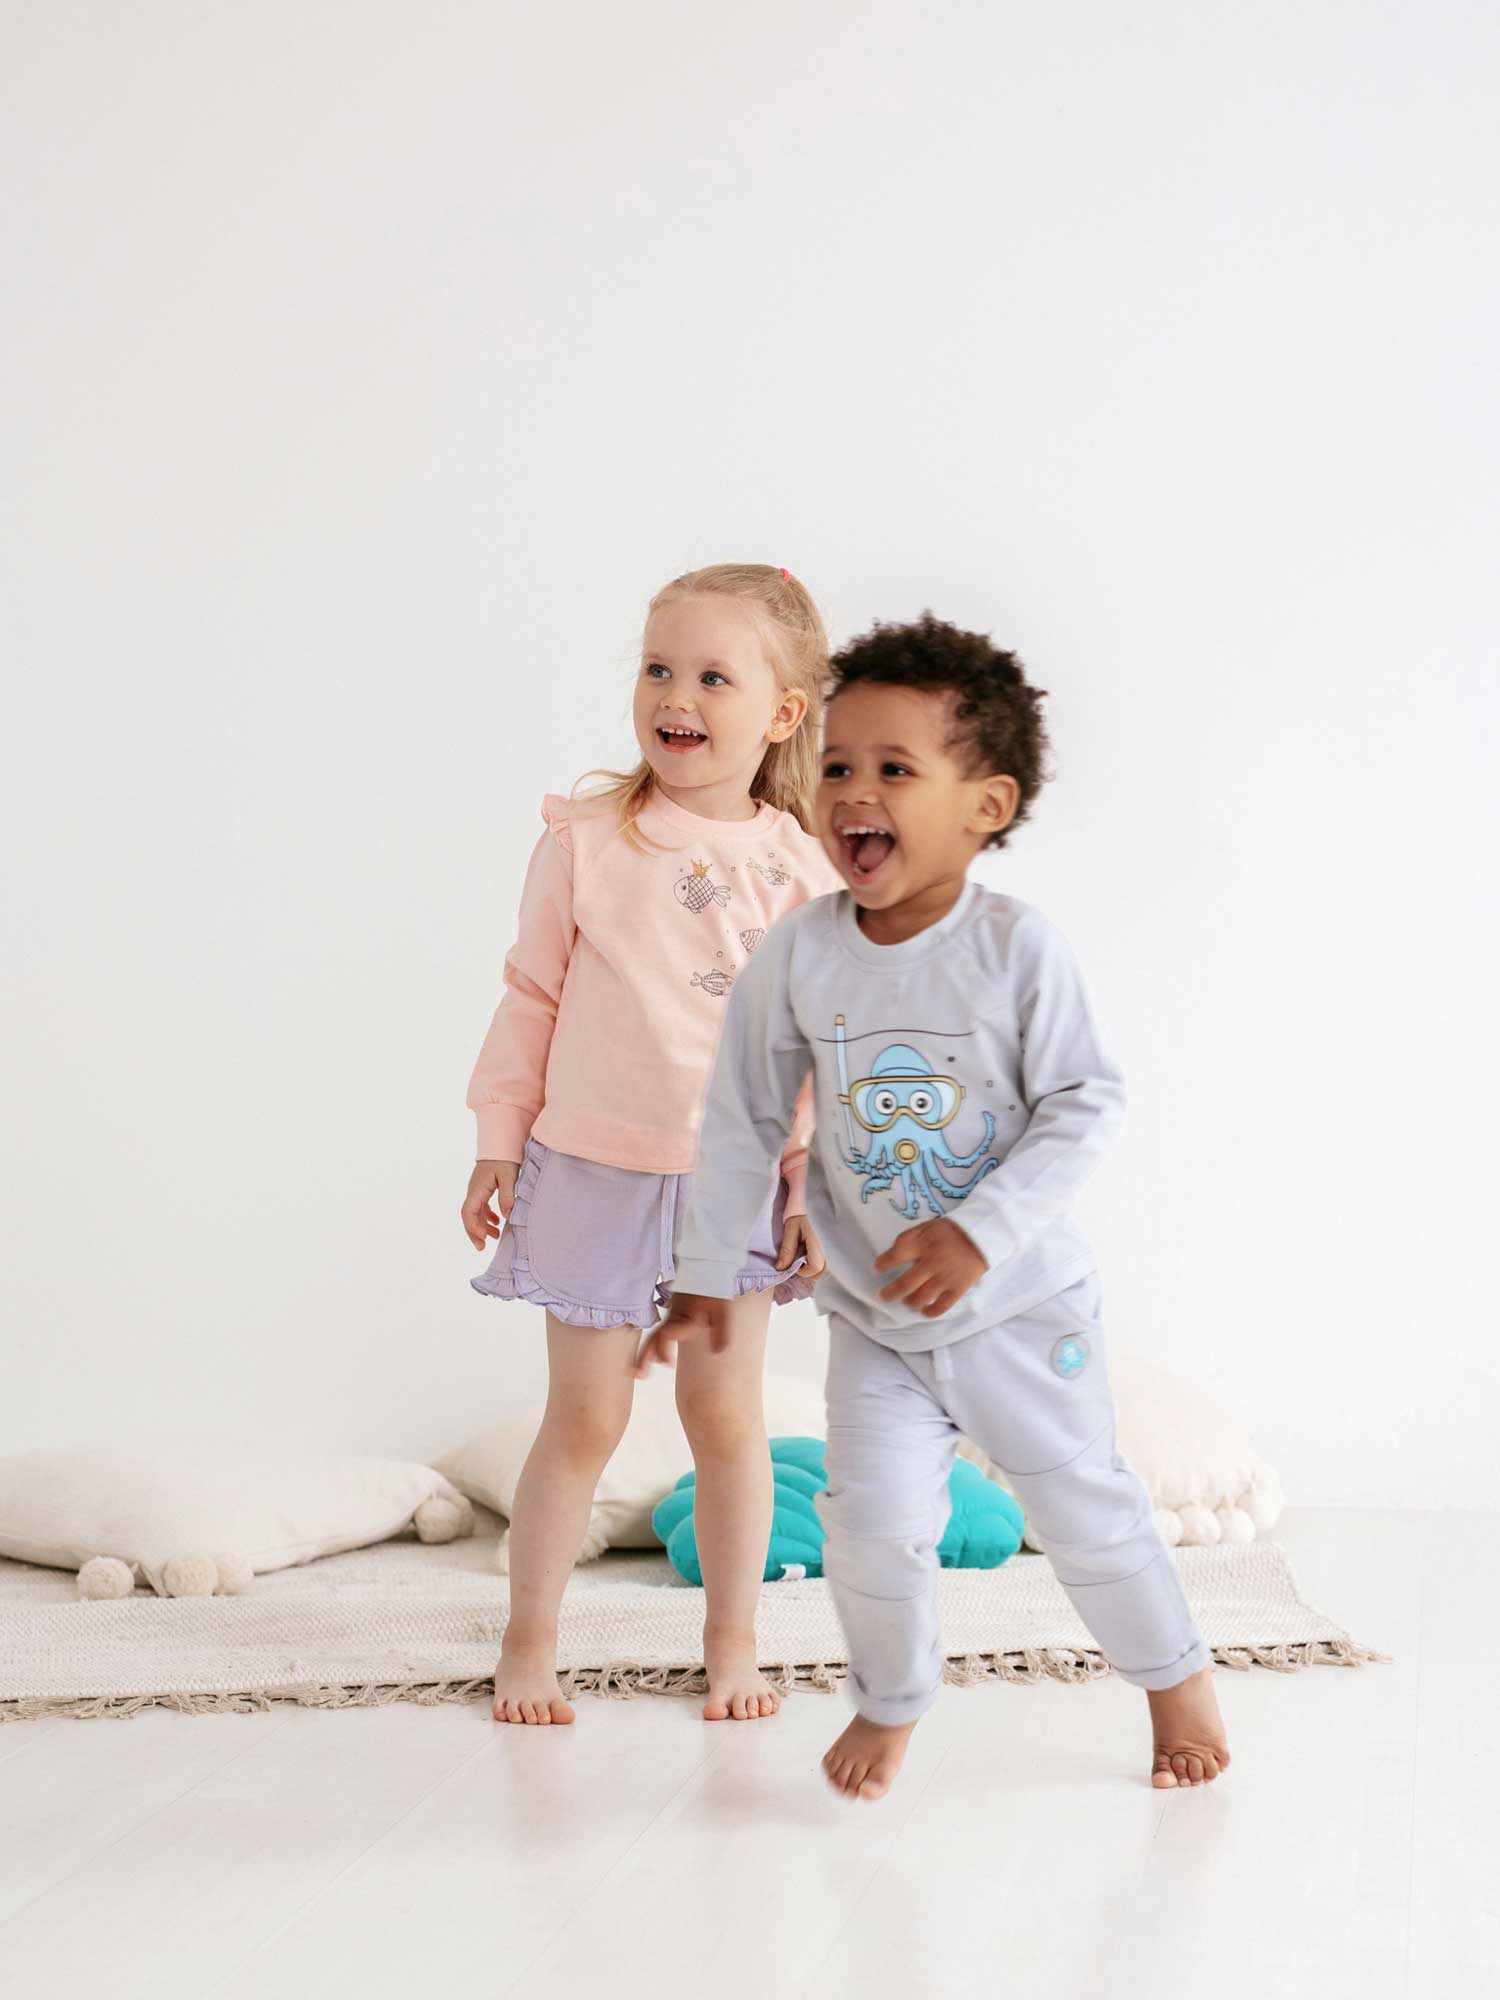 Baby T-shirt Sea Friends 332 has two button closure at the neck adds an extra touch of comfort so even the most active toddler can now explore with ease.